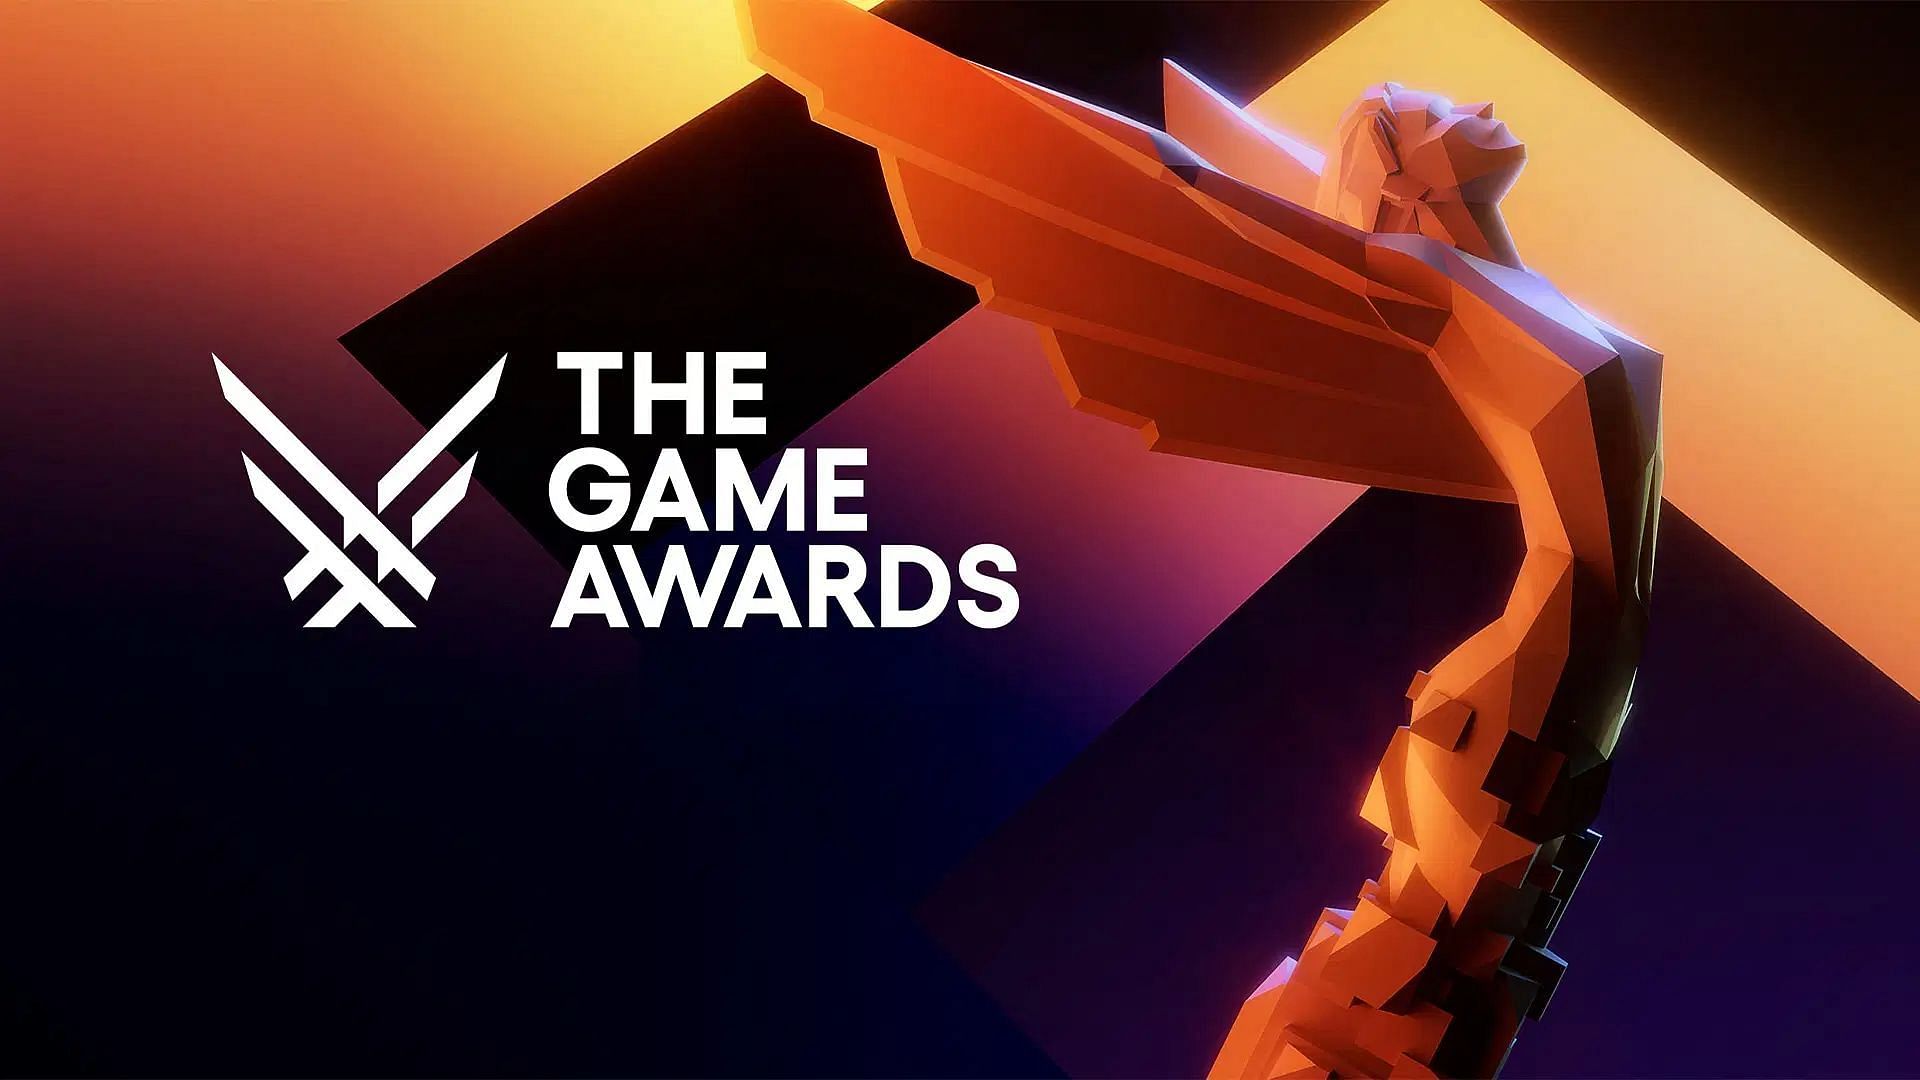 The Game Awards 2023 will feature exciting new game announcements and trailers (Image via The Game Awards, X)